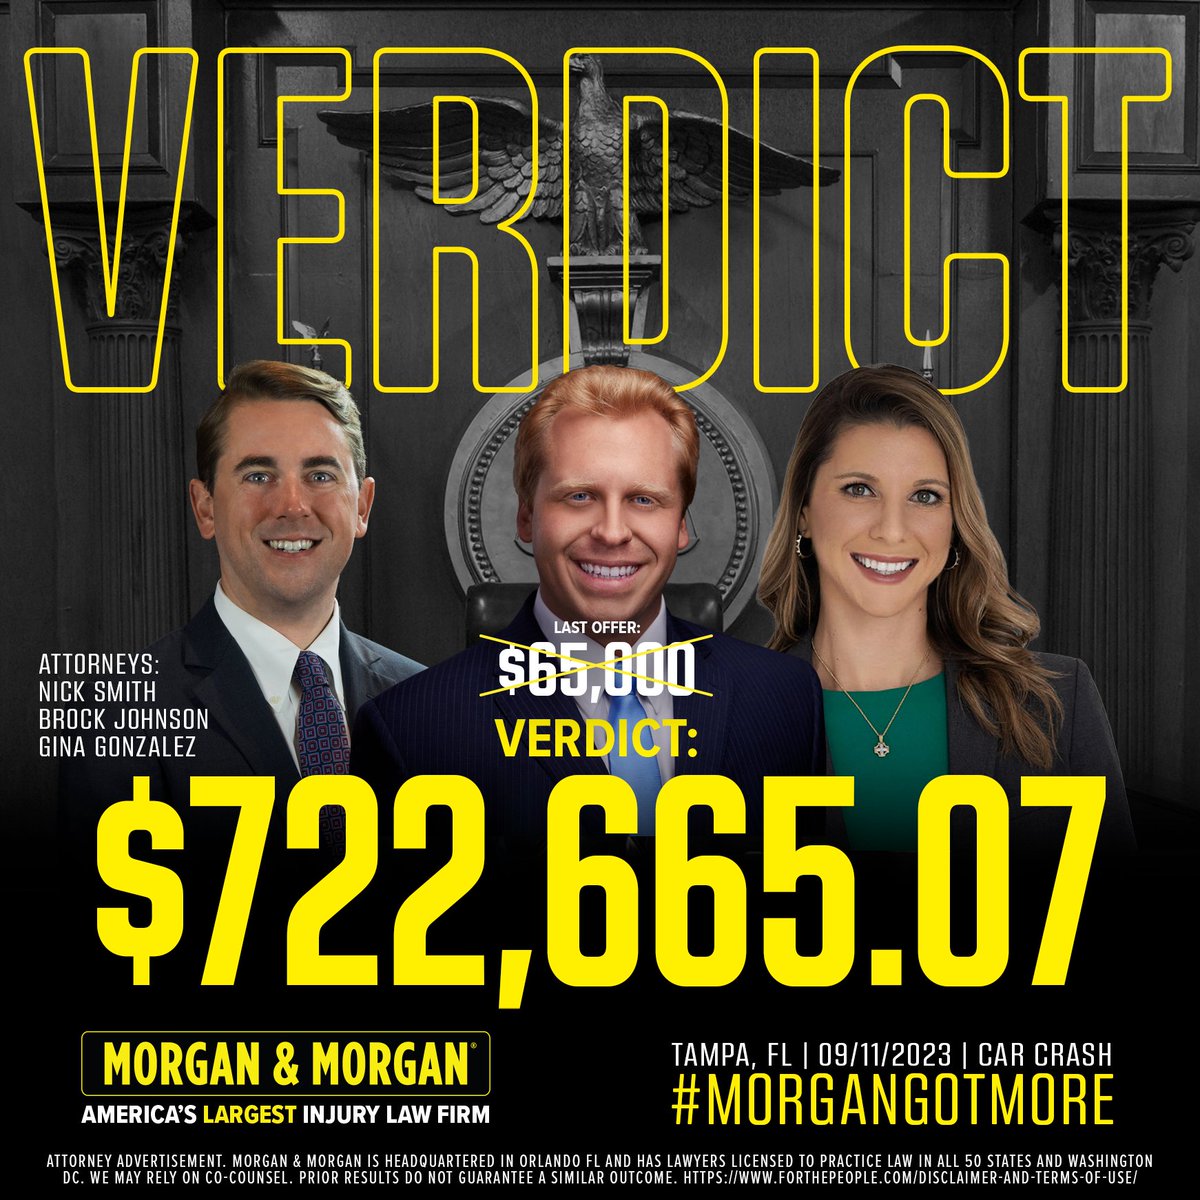 🚨 #VerdictAlert:

Nick Smith, Brock Johnson, and Gina Gonzalez just obtained a $722,665.07 verdict for our client in Hillsborough County!

The last offer was only $65,000. That's #MorganMath.

#ForThePeople #MorganGotMore